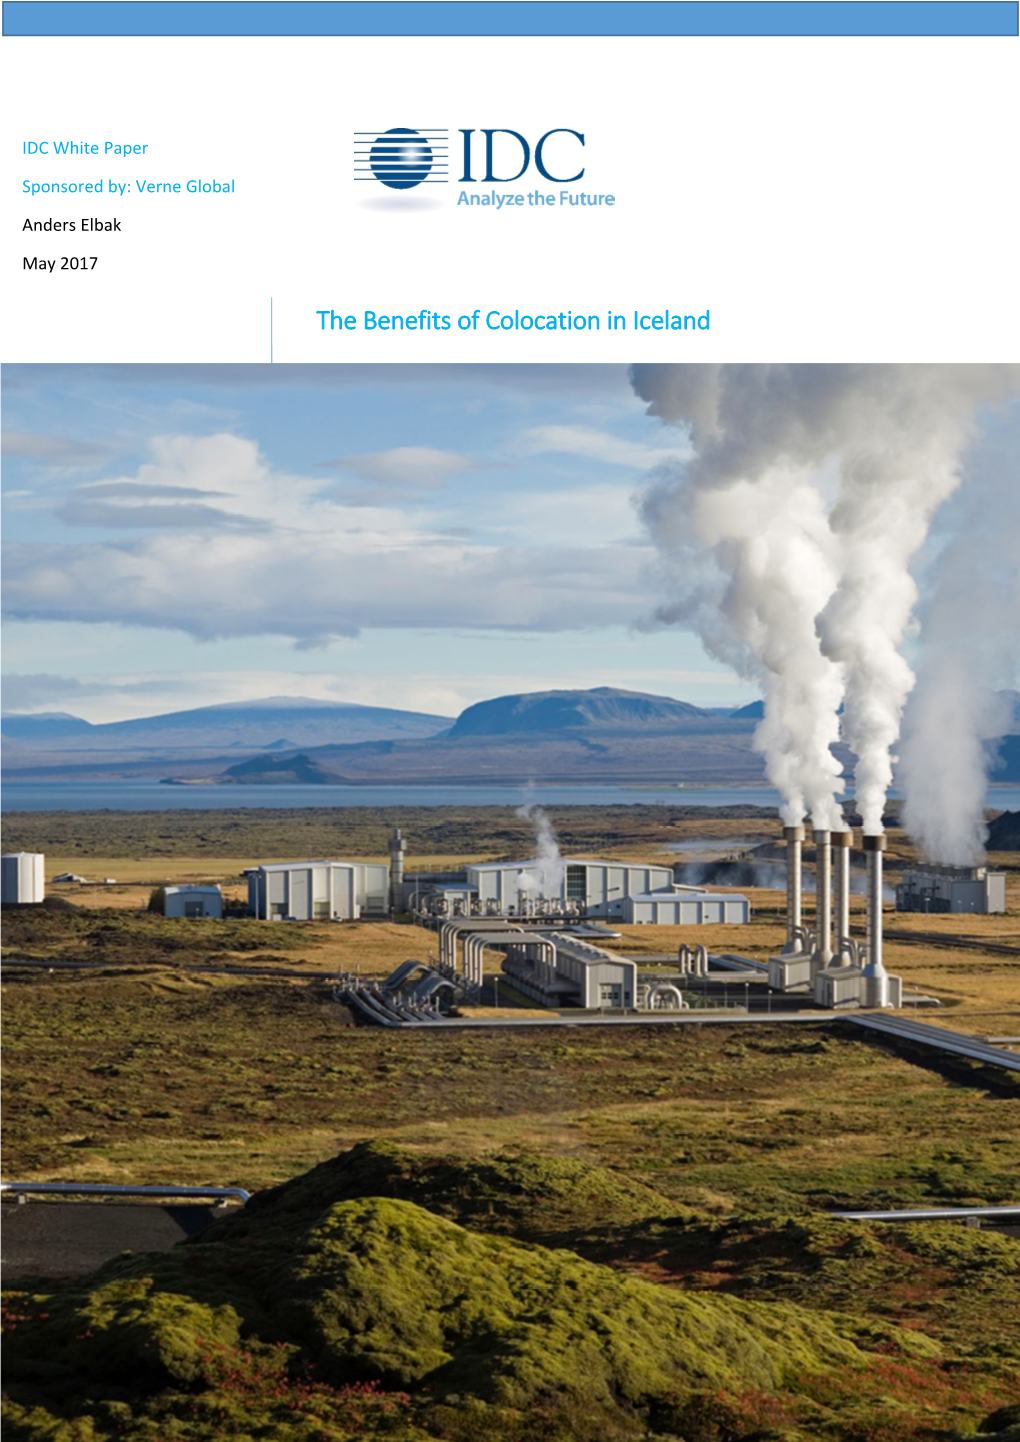 The Benefits of Colocation in Iceland